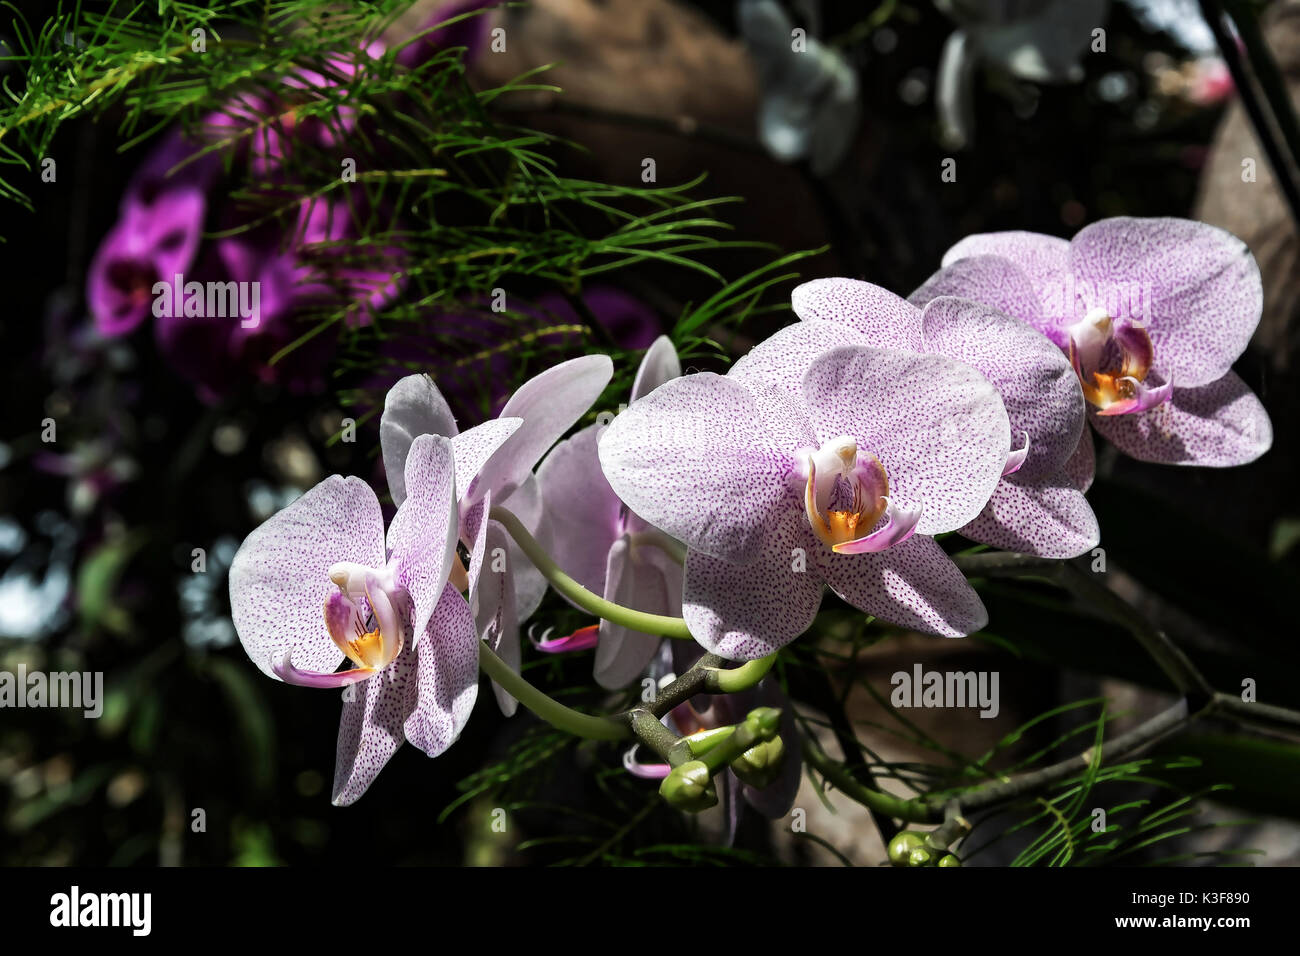 Flowering decorative orchid of white and purple colors Stock Photo